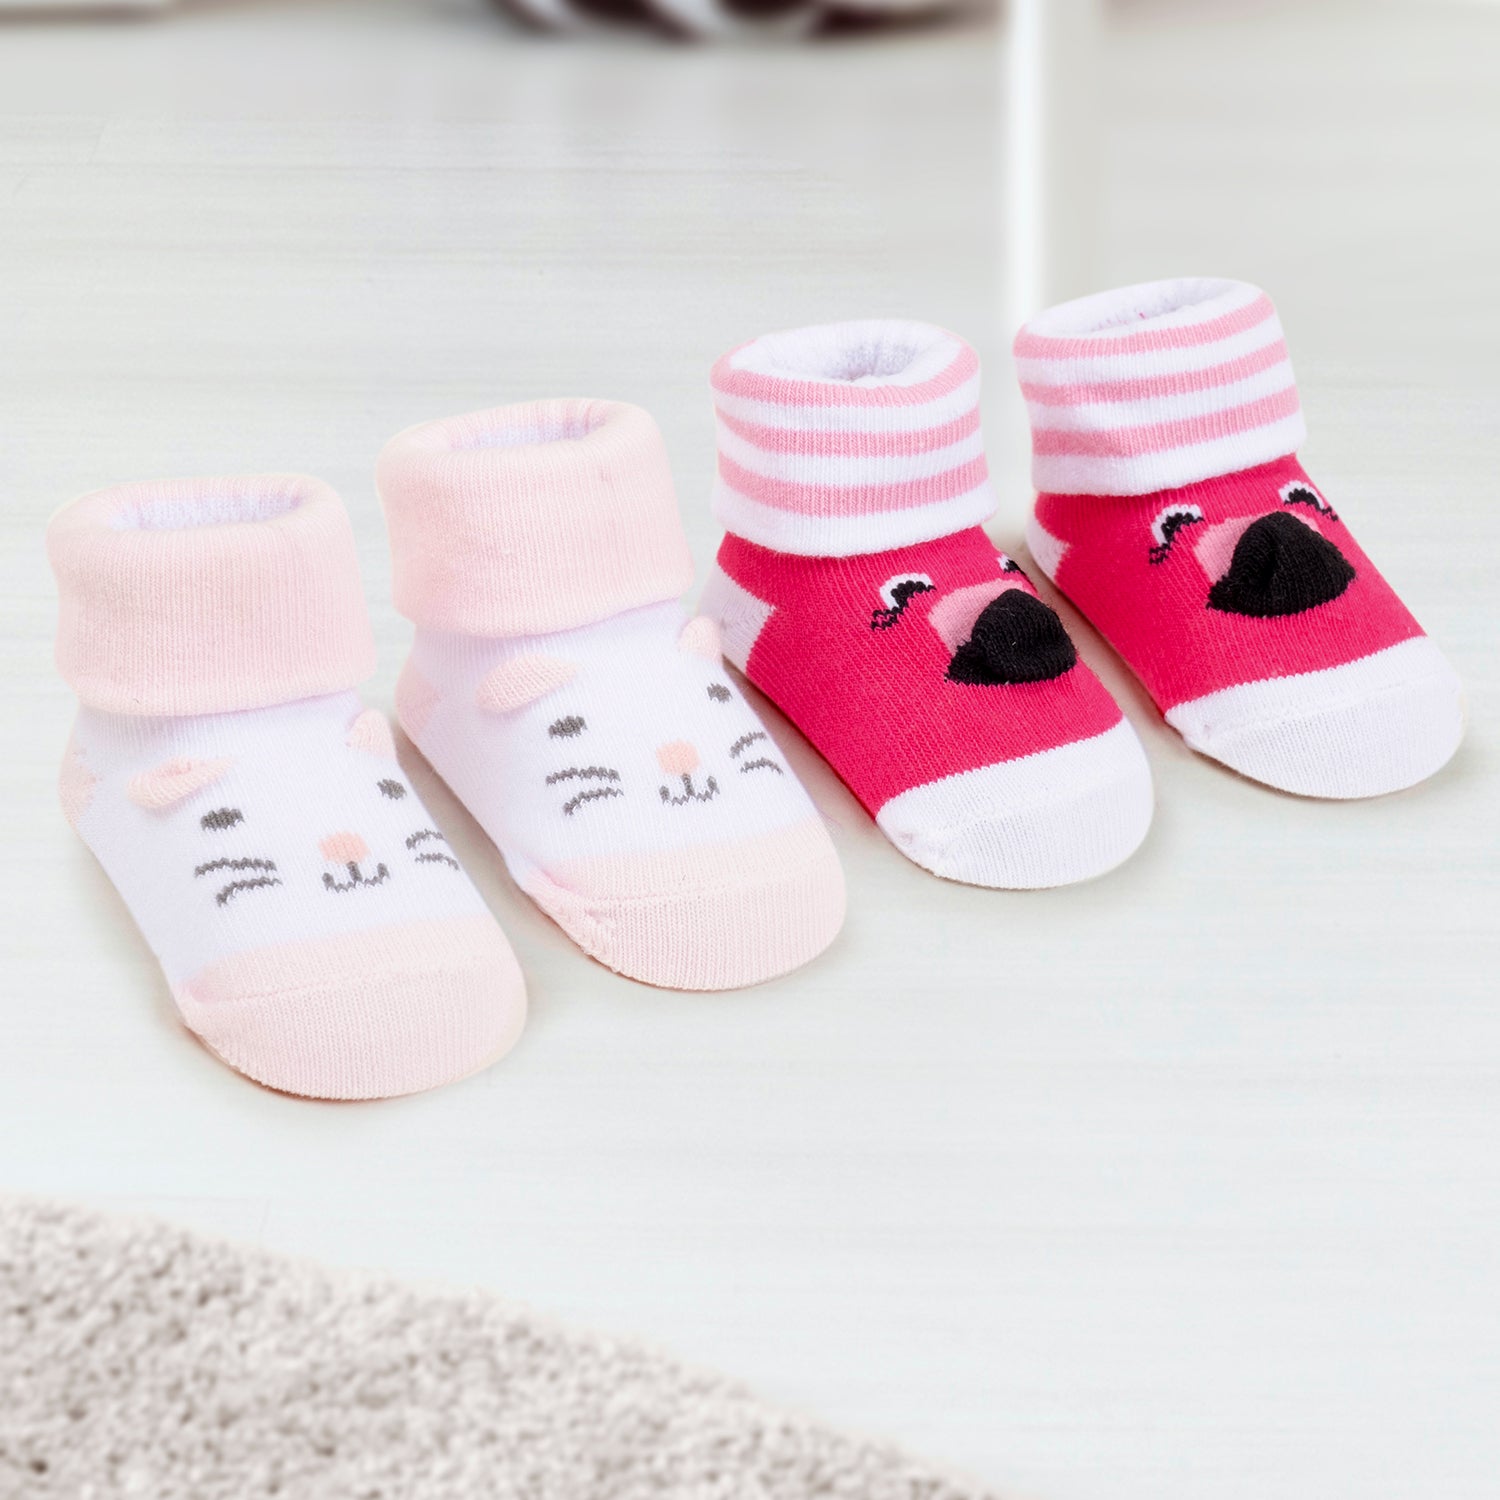 Baby Moo 3D Kitty Dog Cotton Ankle Length Infant Dress Up Walking Set of 2 Socks Booties - Pink